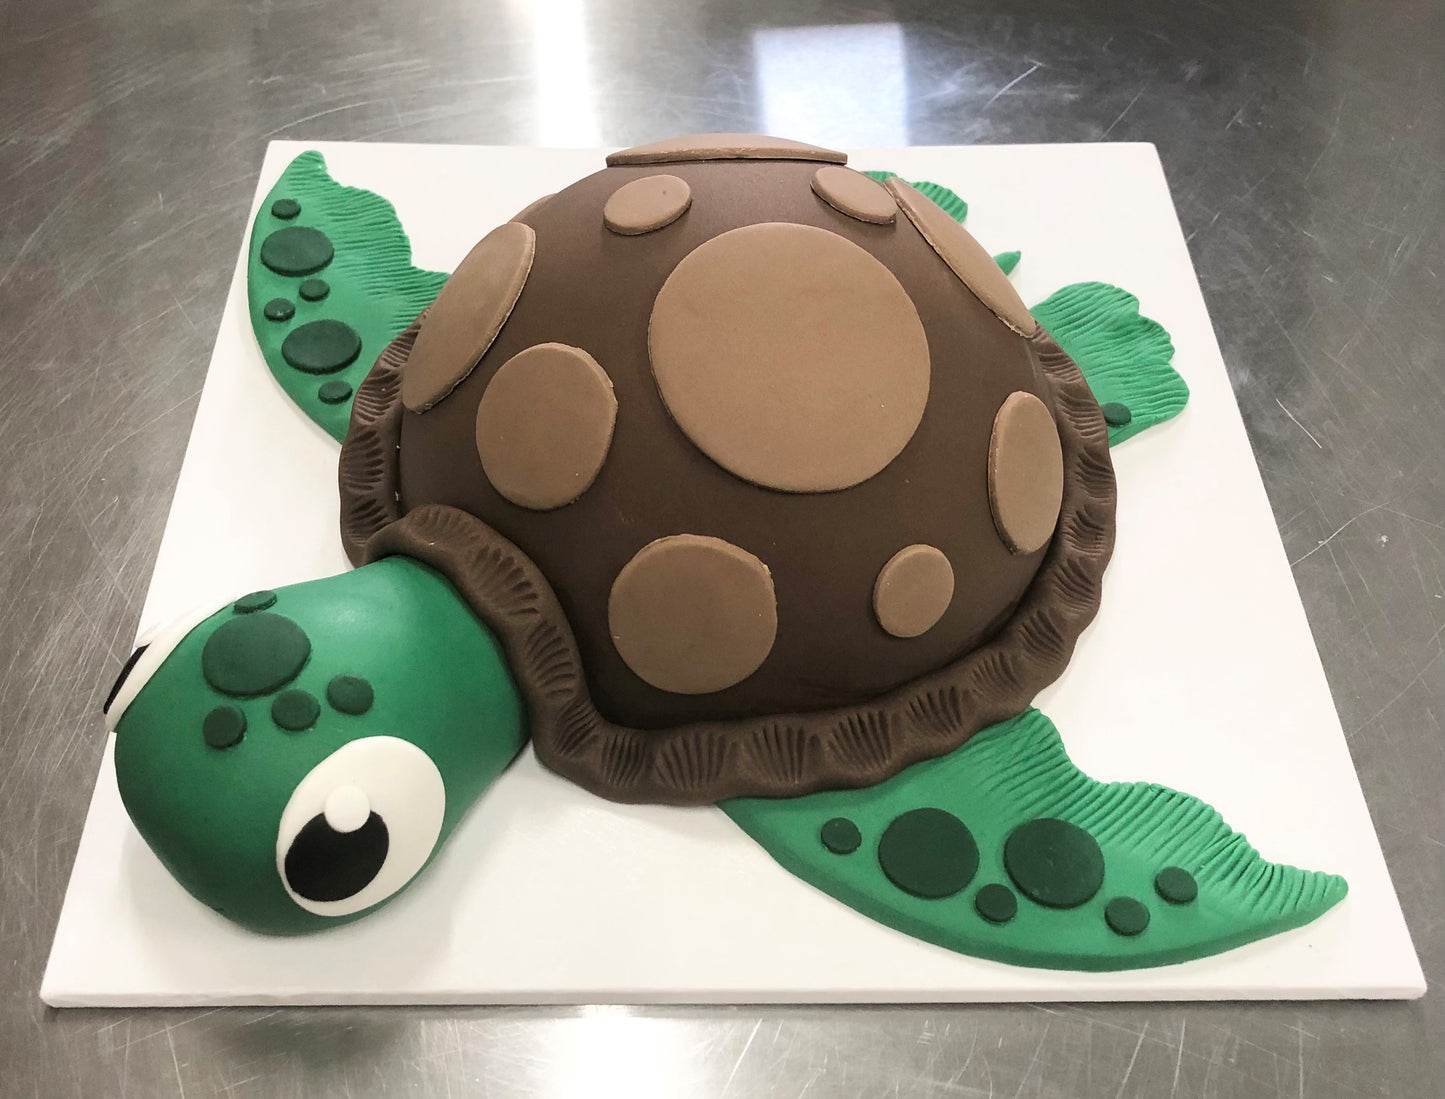 Cake in the box - Turtle - Add on kit